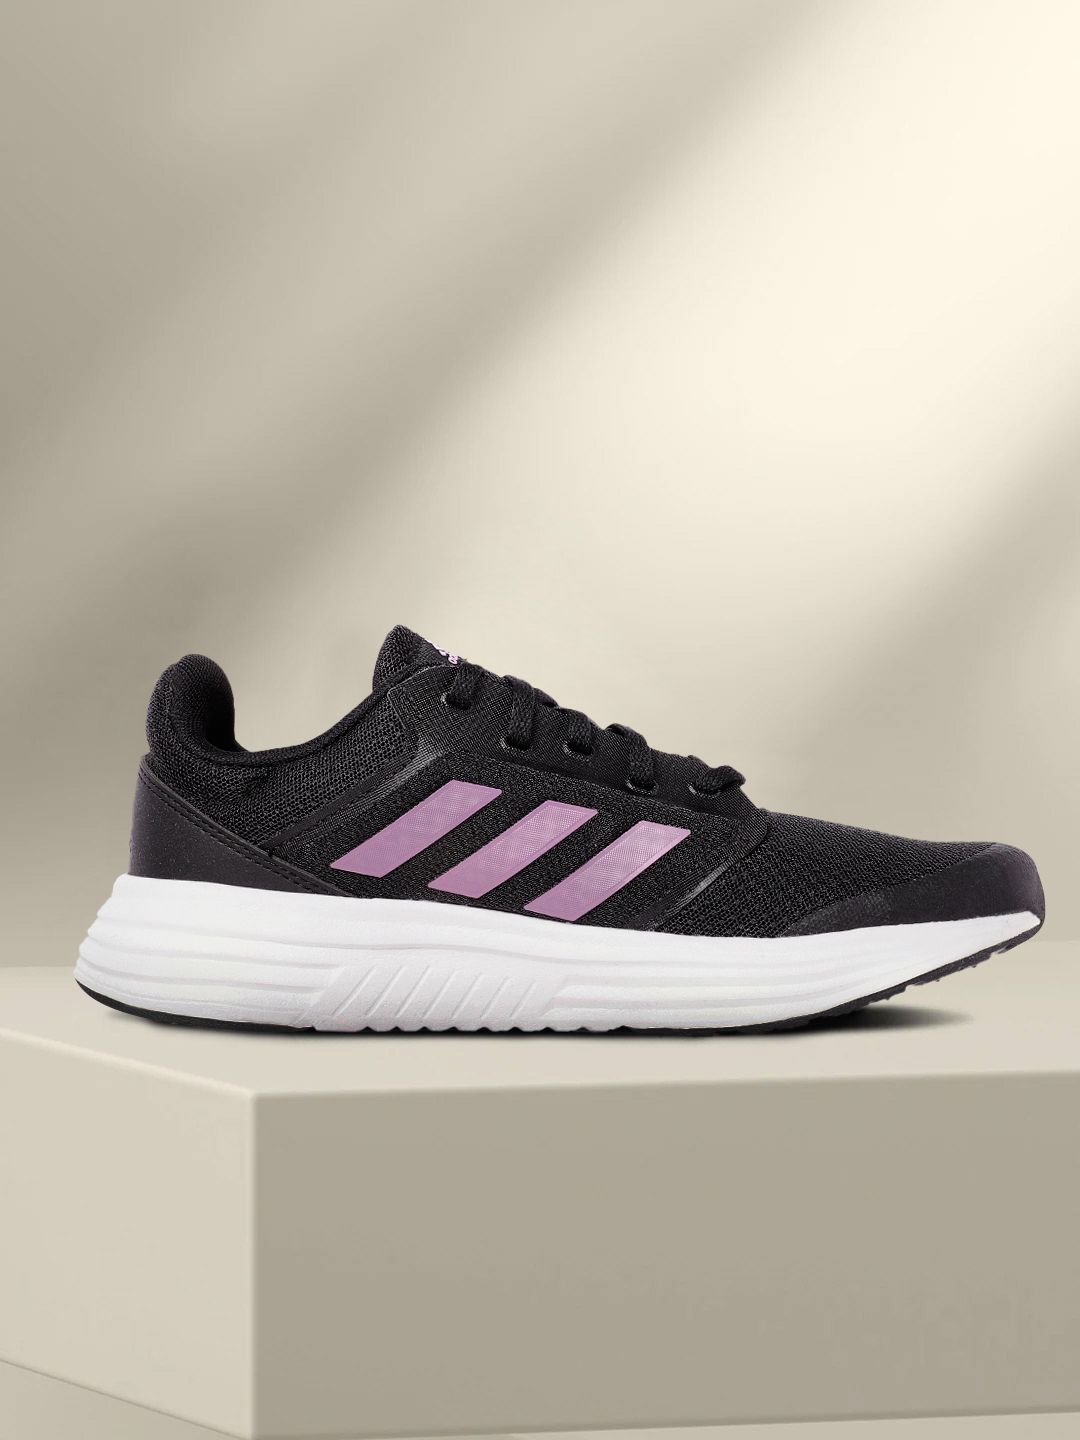 ADIDAS Women Black Woven Design Galaxy 5 New Running Shoes Price in India